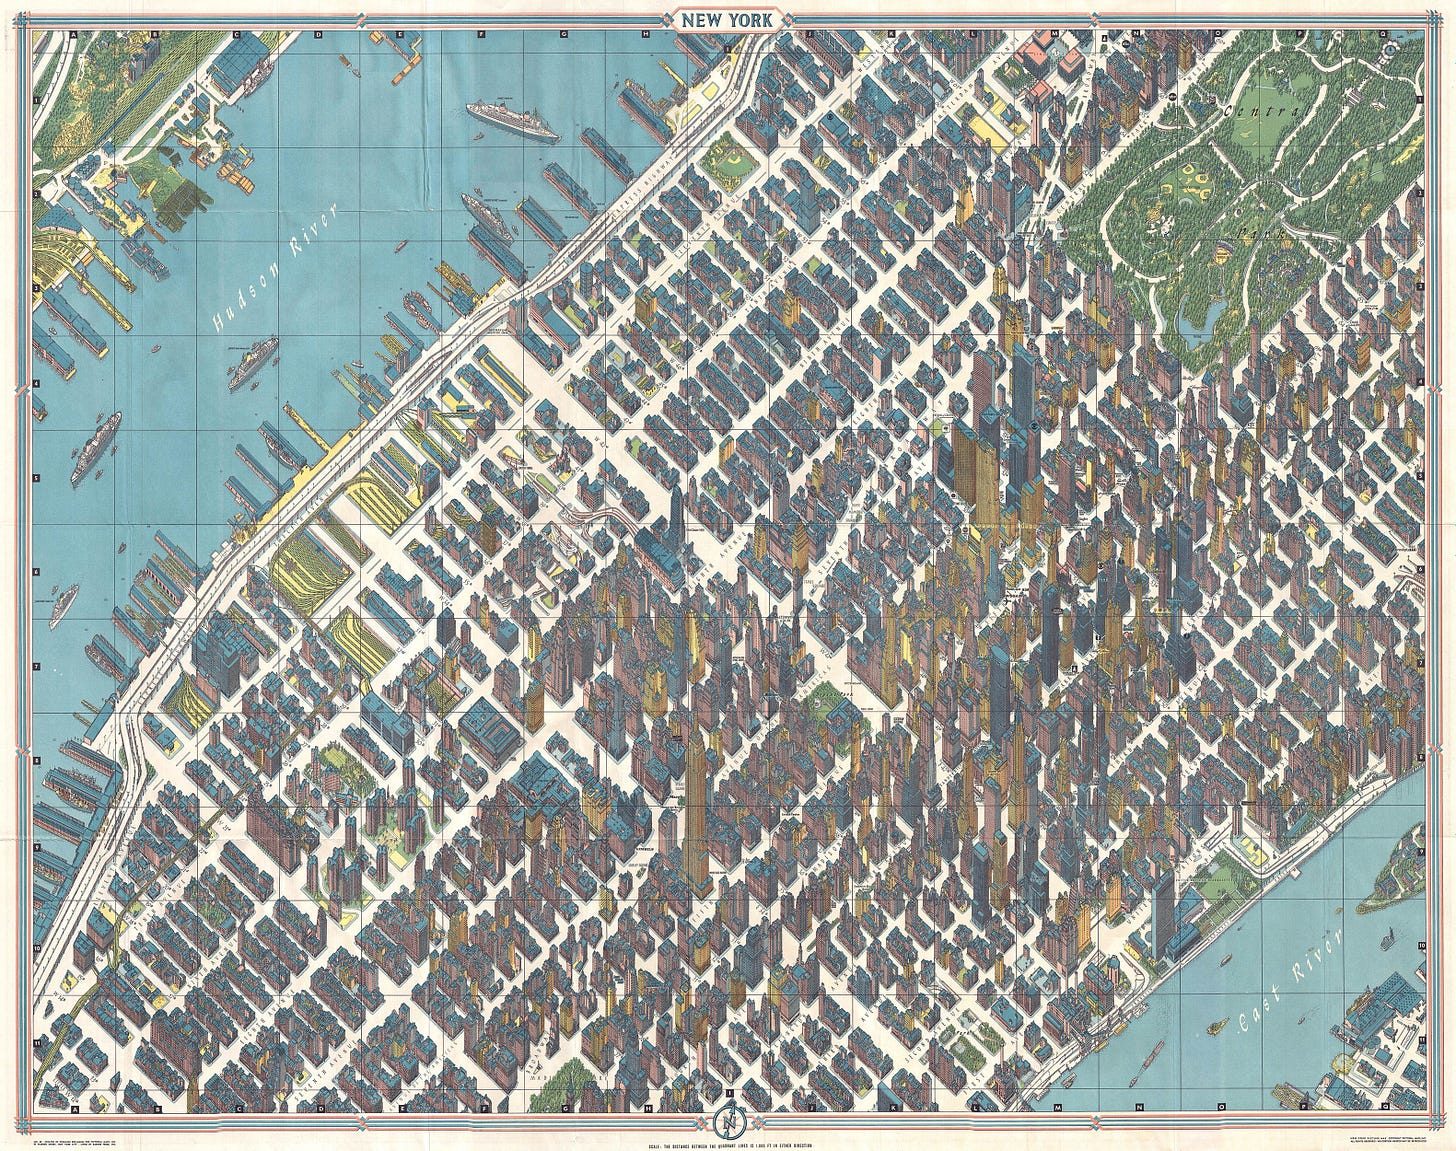 New York Picture Map by Herman Bollmann, 1962.